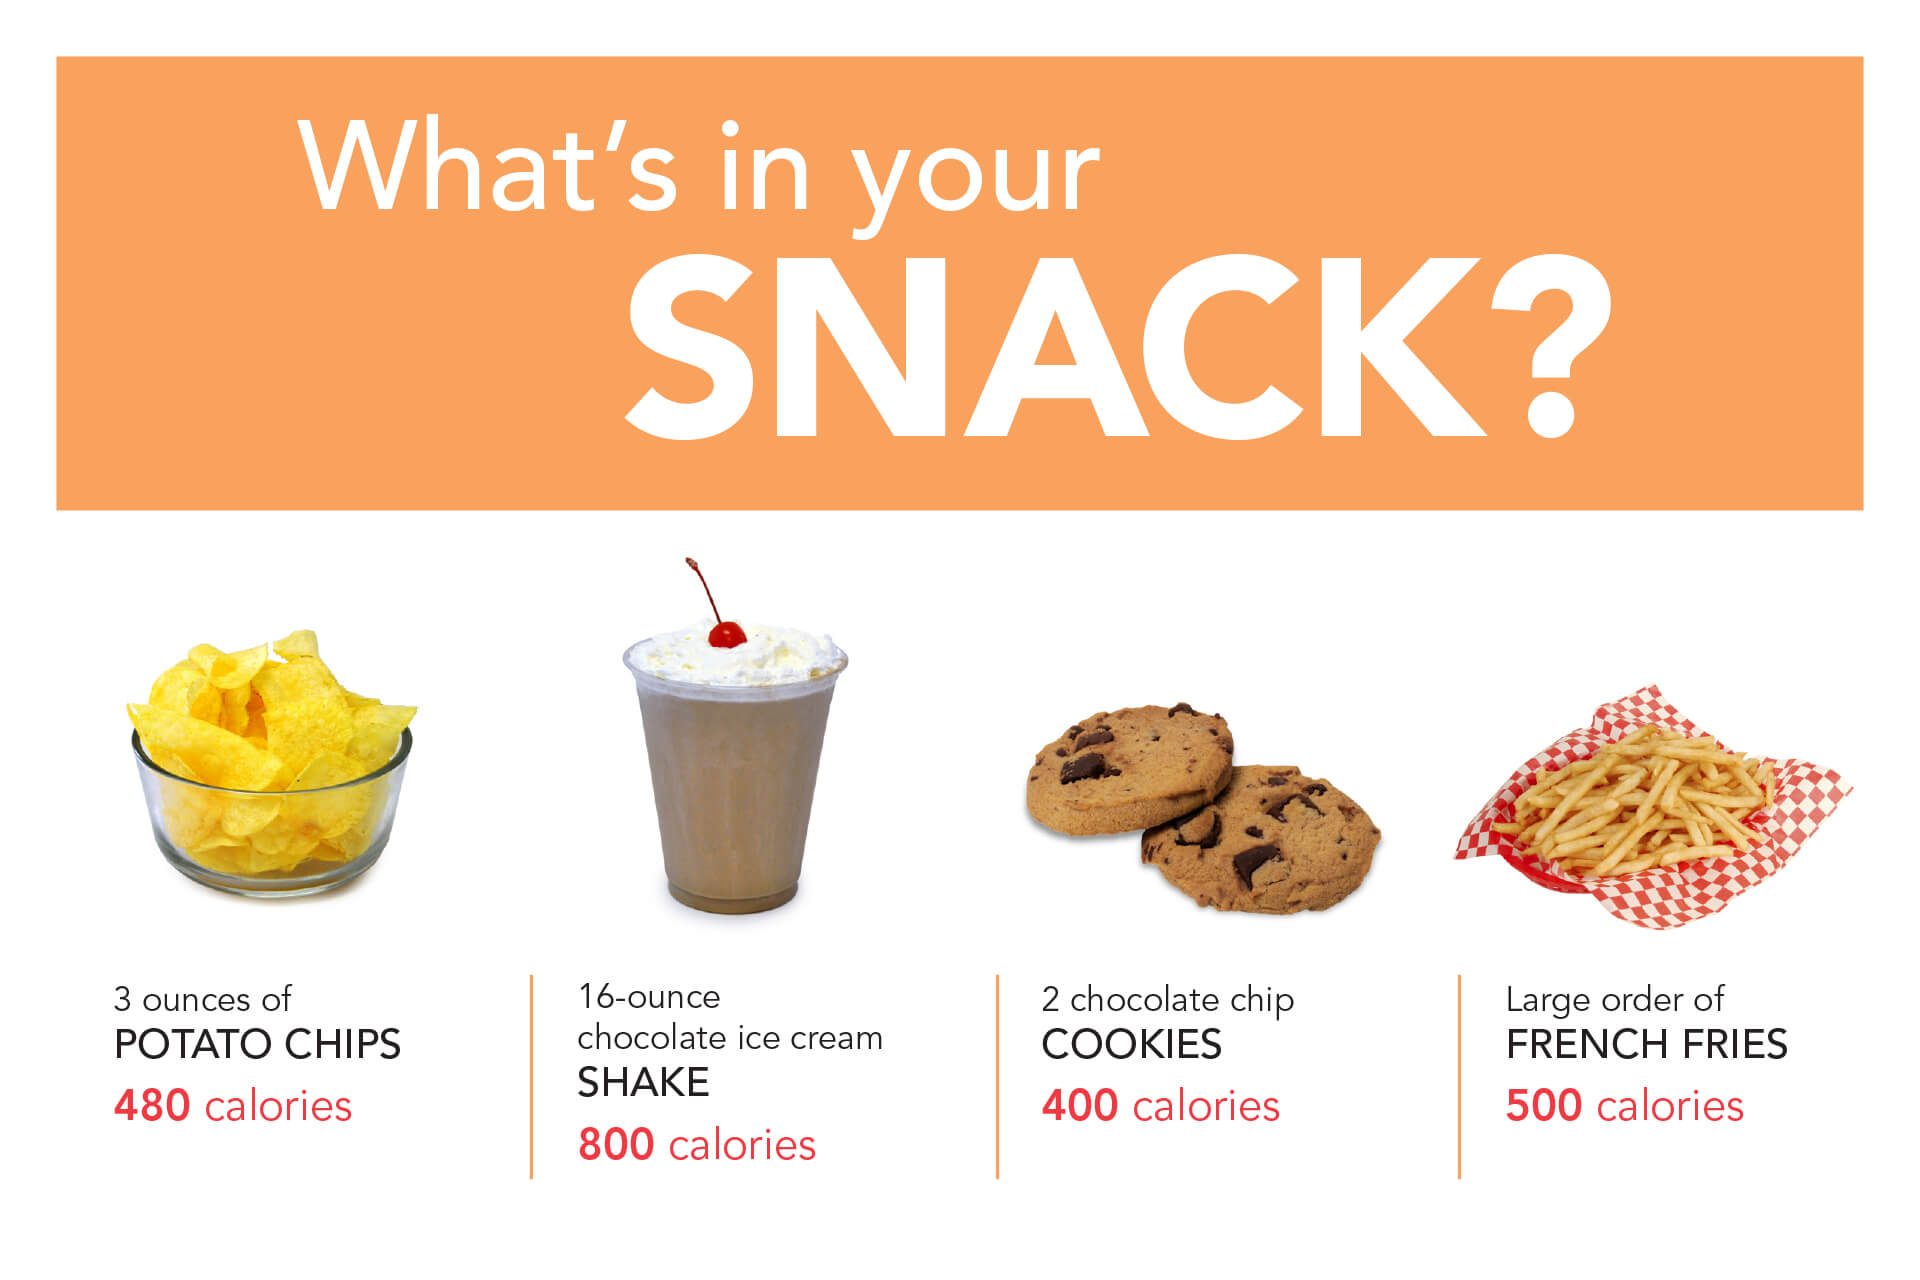 What’s in Your Snack?